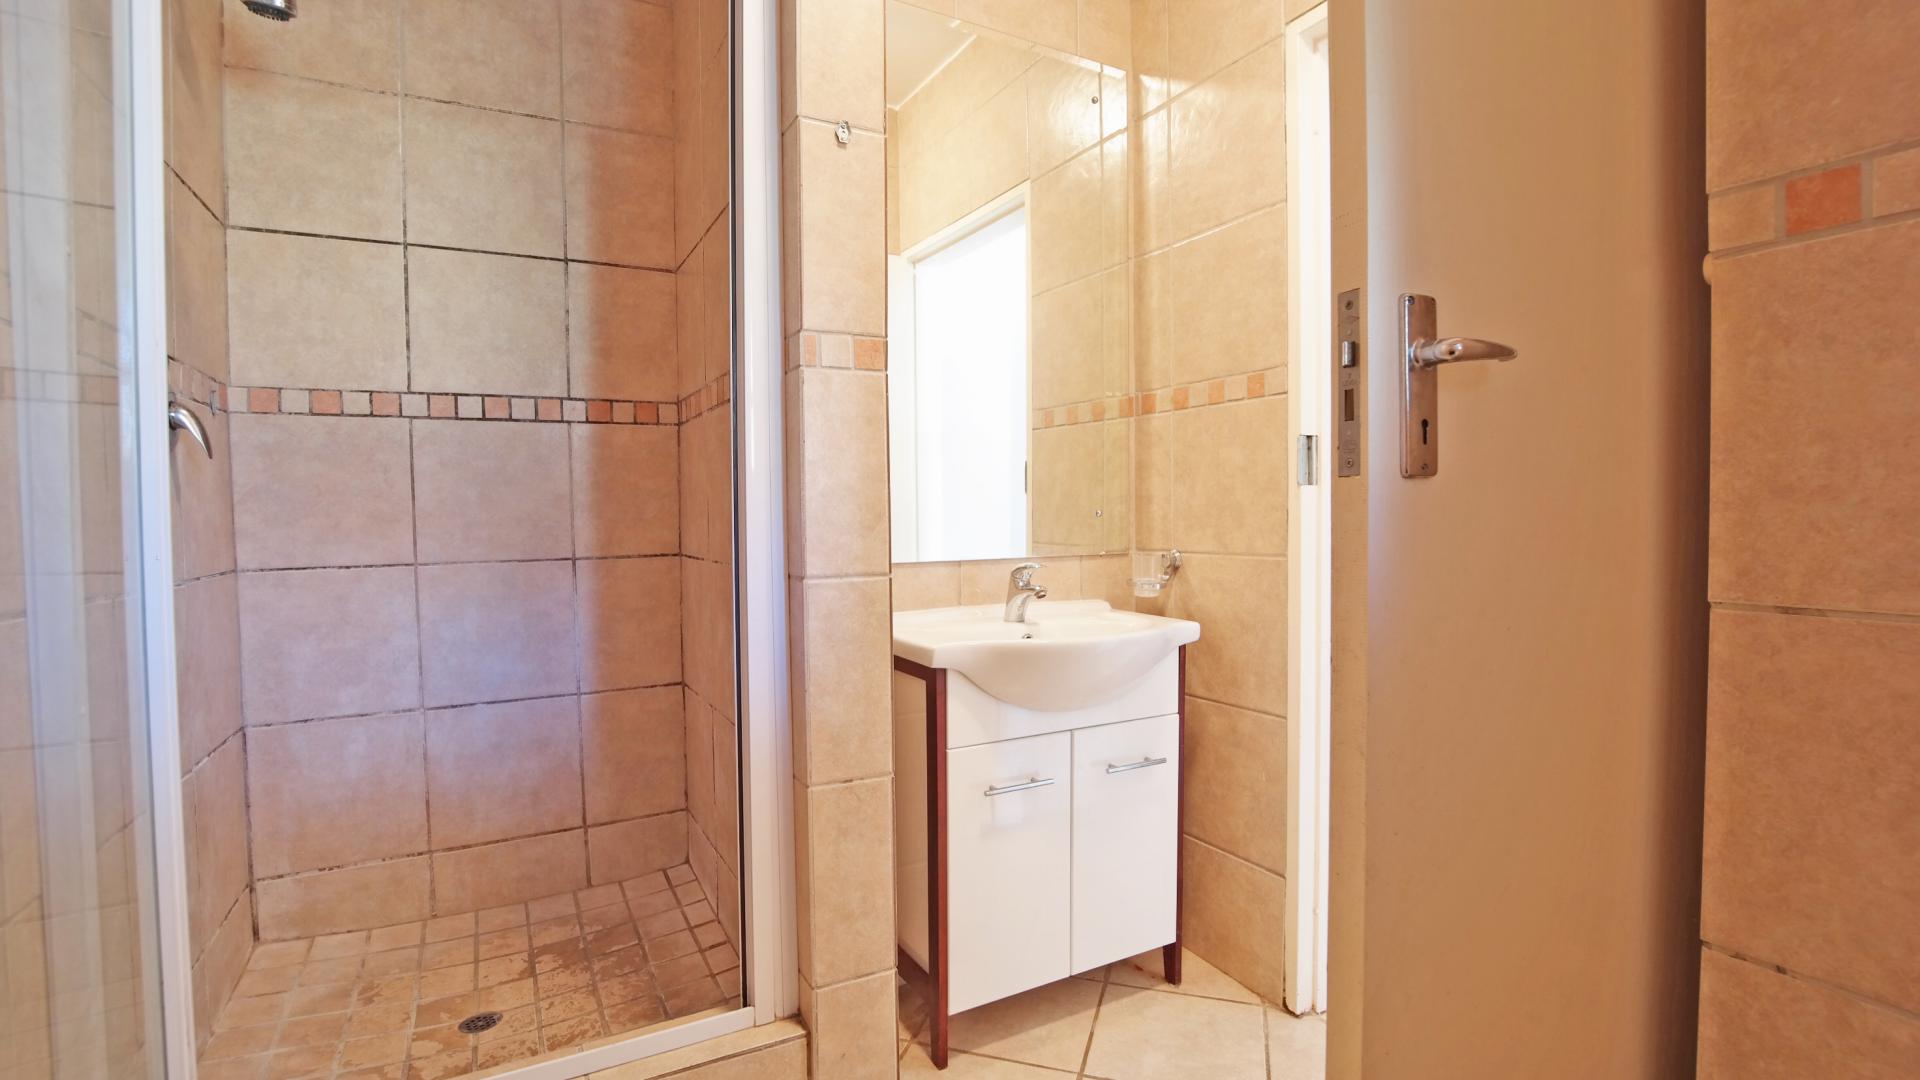 Main Bathroom - 5 square meters of property in The Meadows Estate